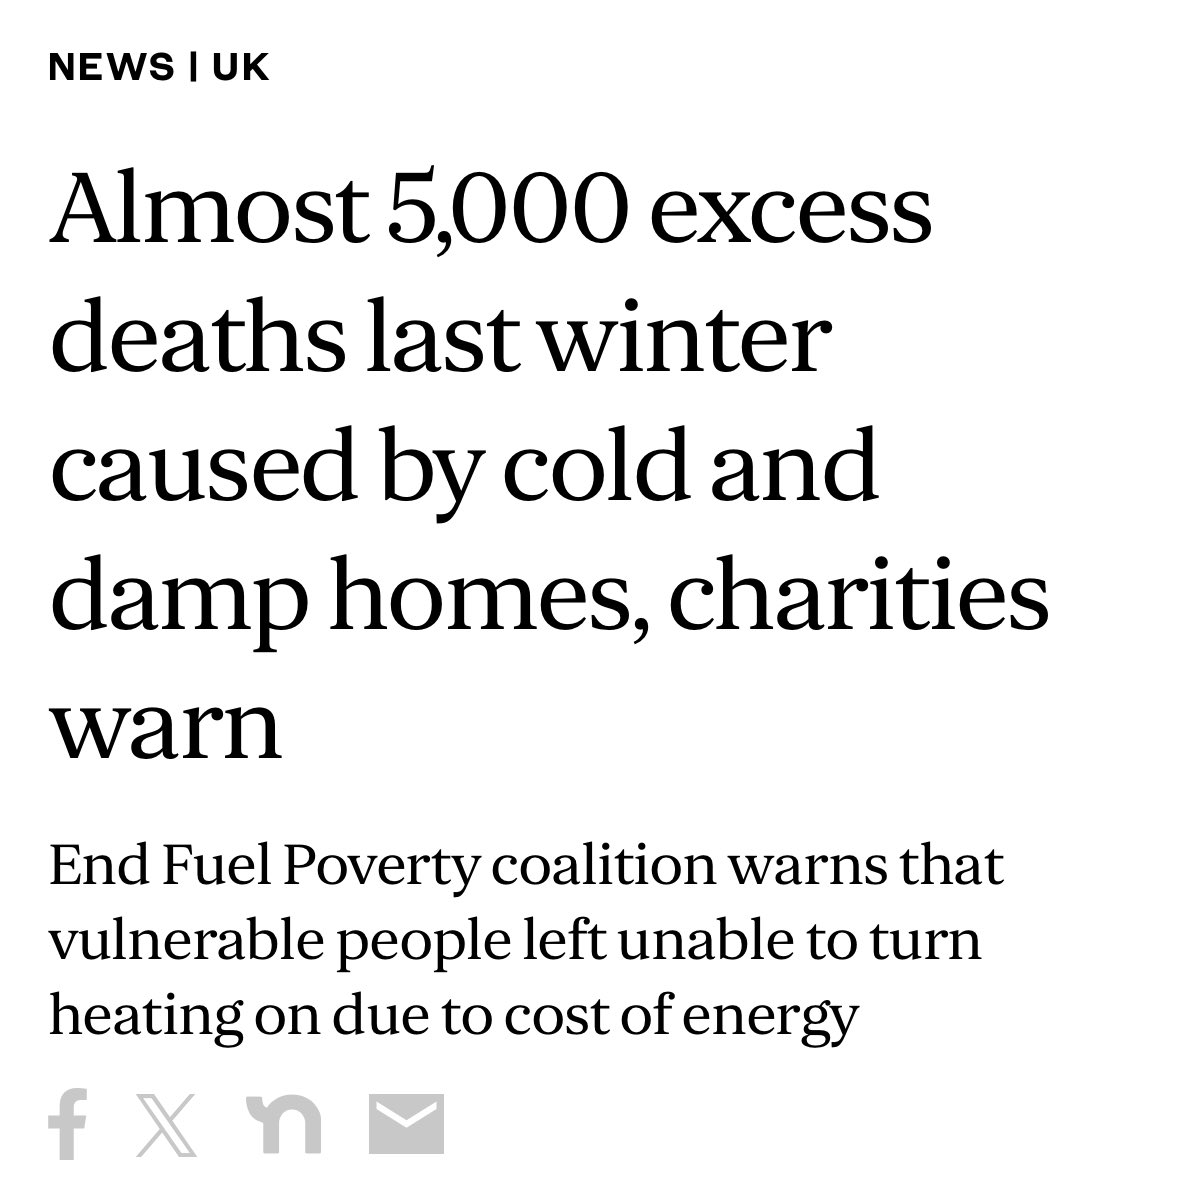 they make bank while the working classes freeze to death in their homes.